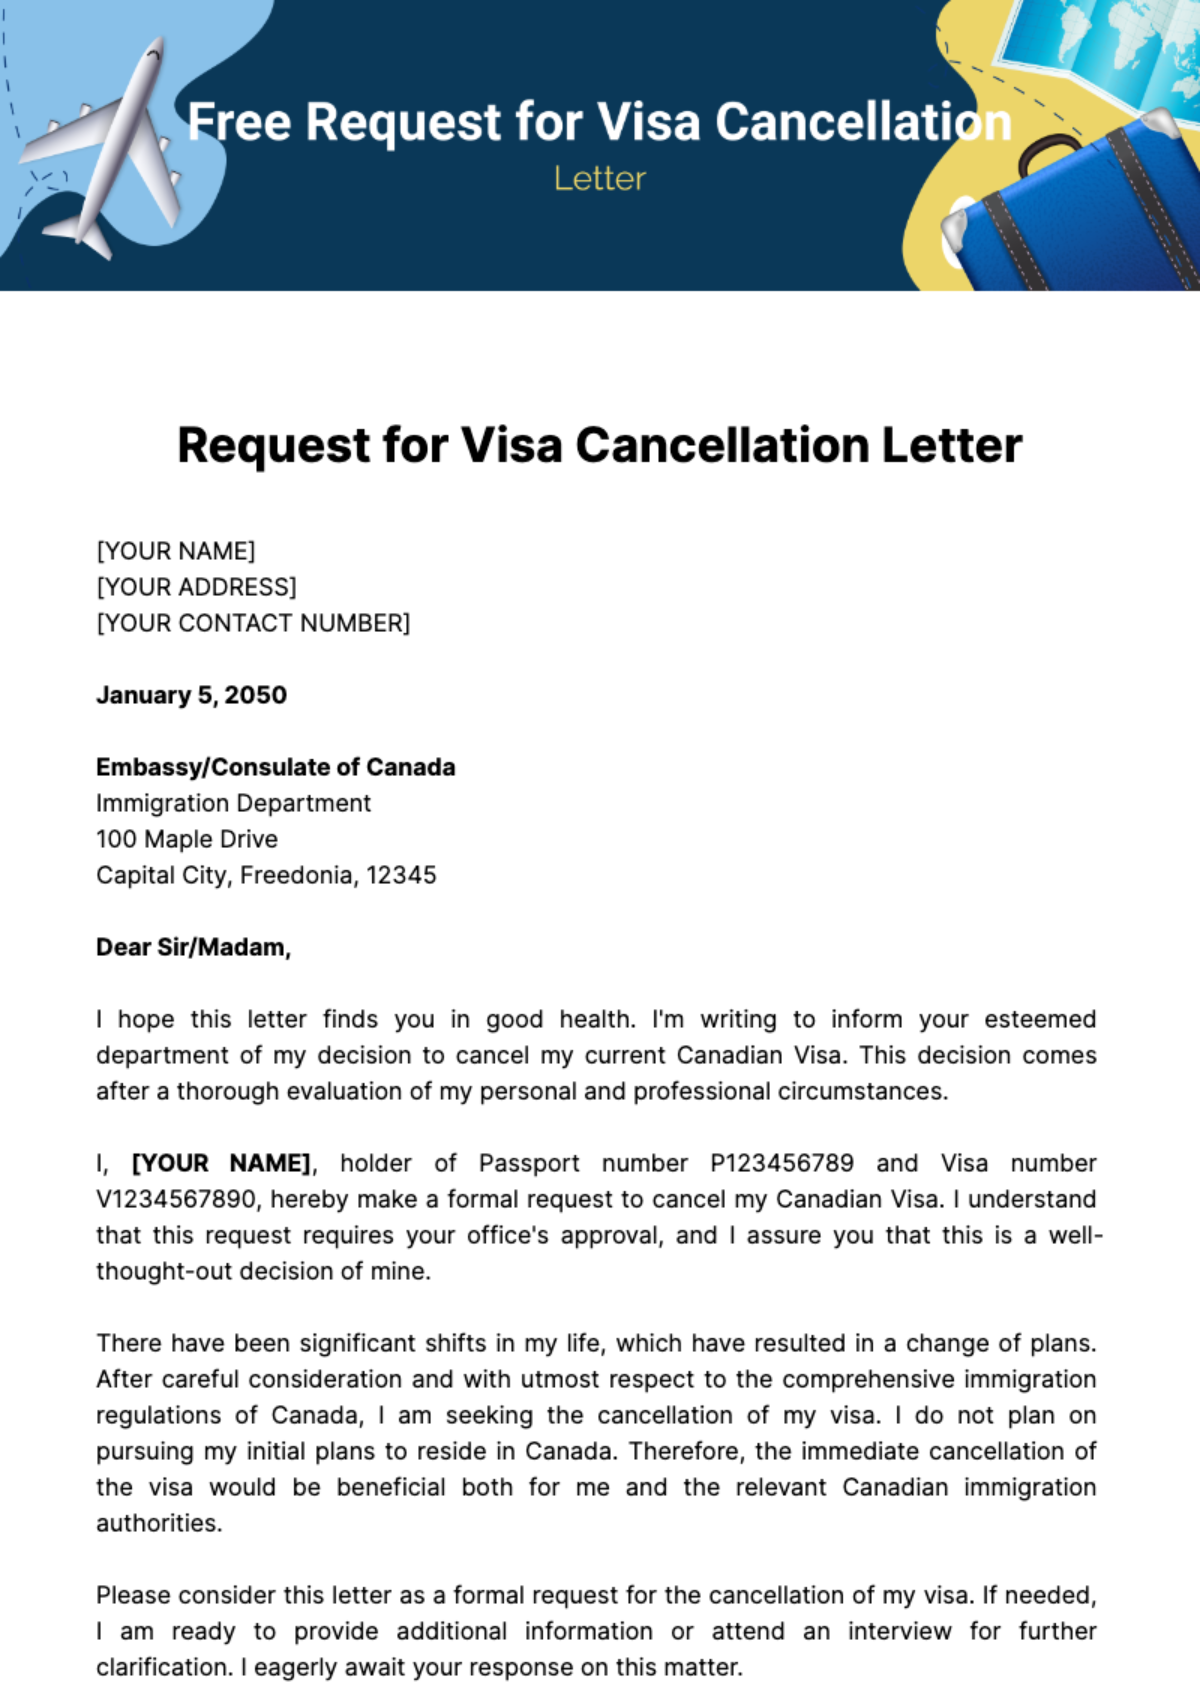 Free Request for Visa Cancellation Letter Template